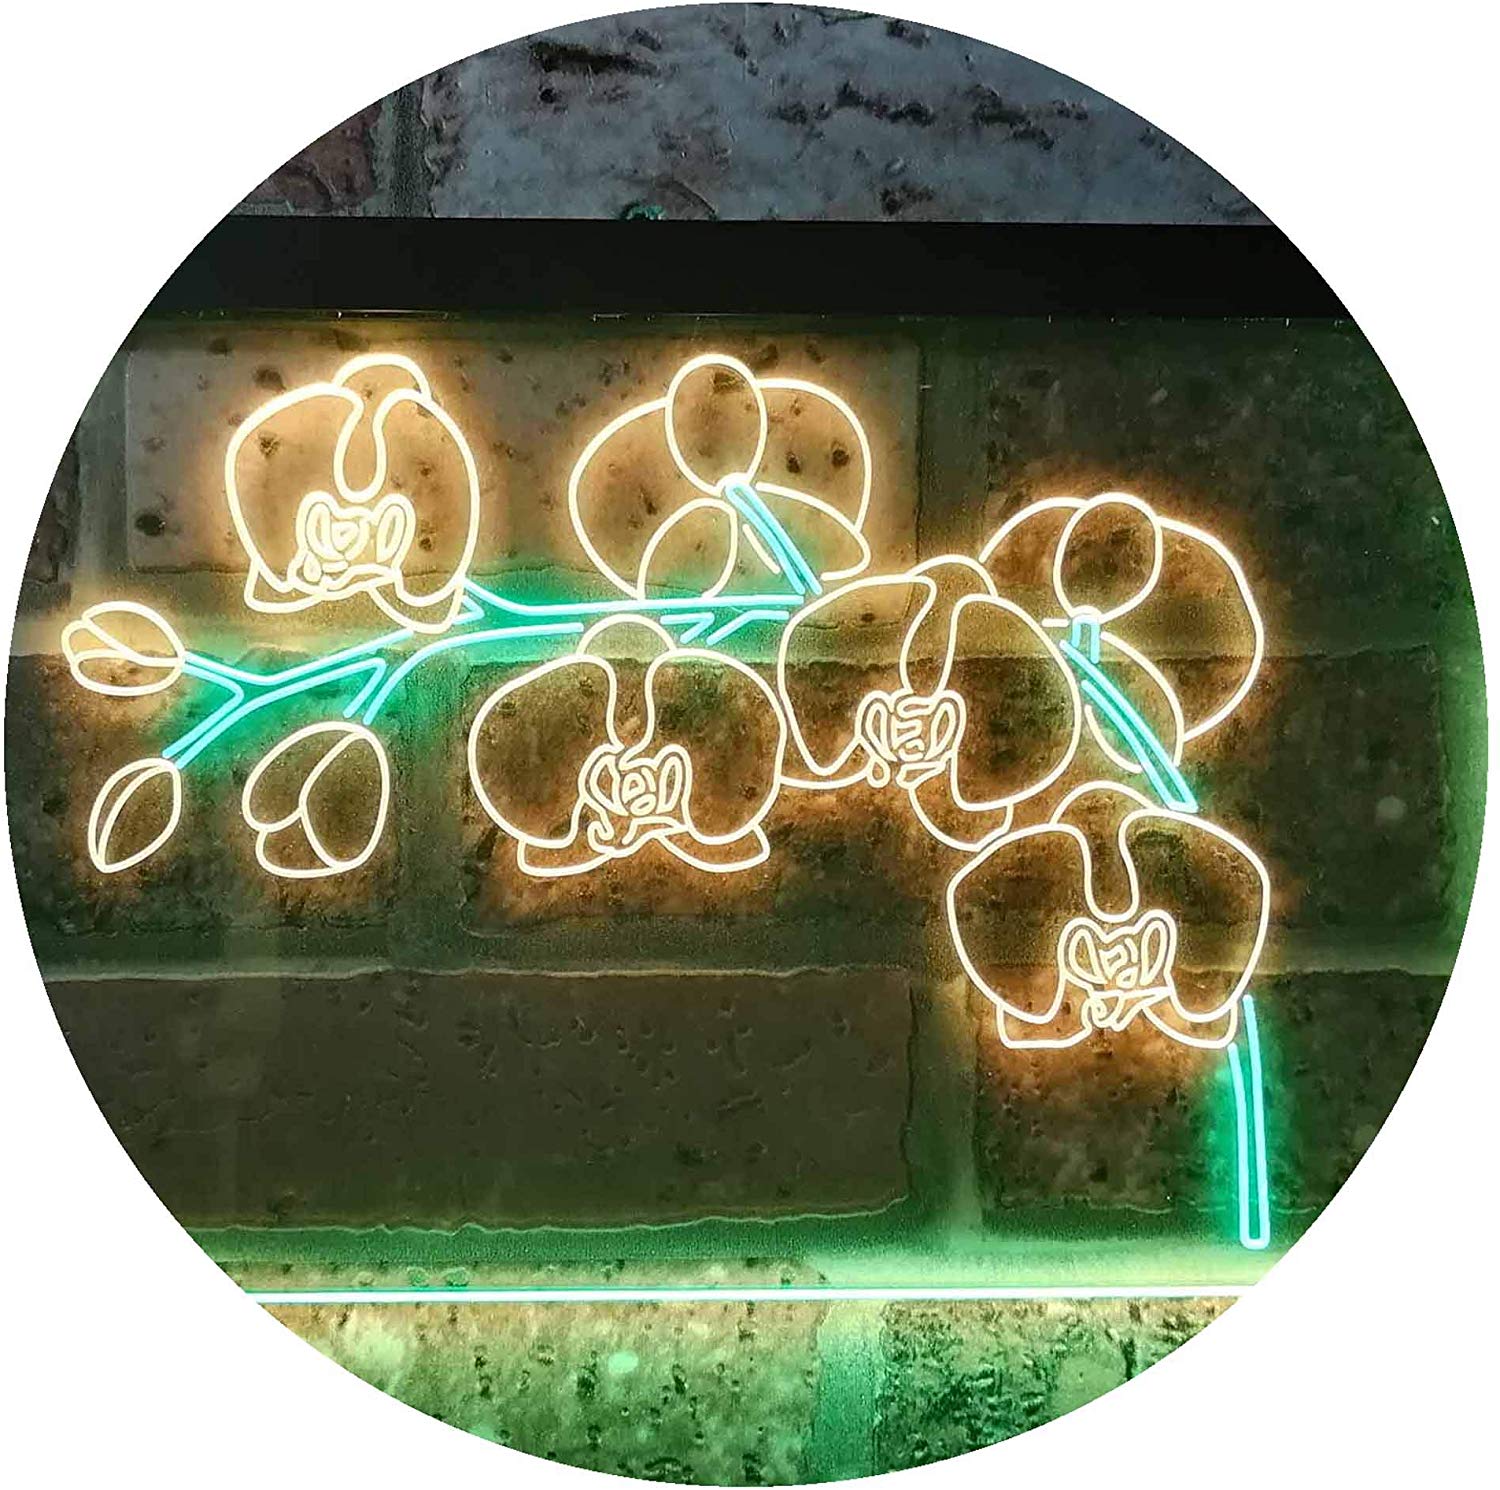 Orchid Flower Neon Sign